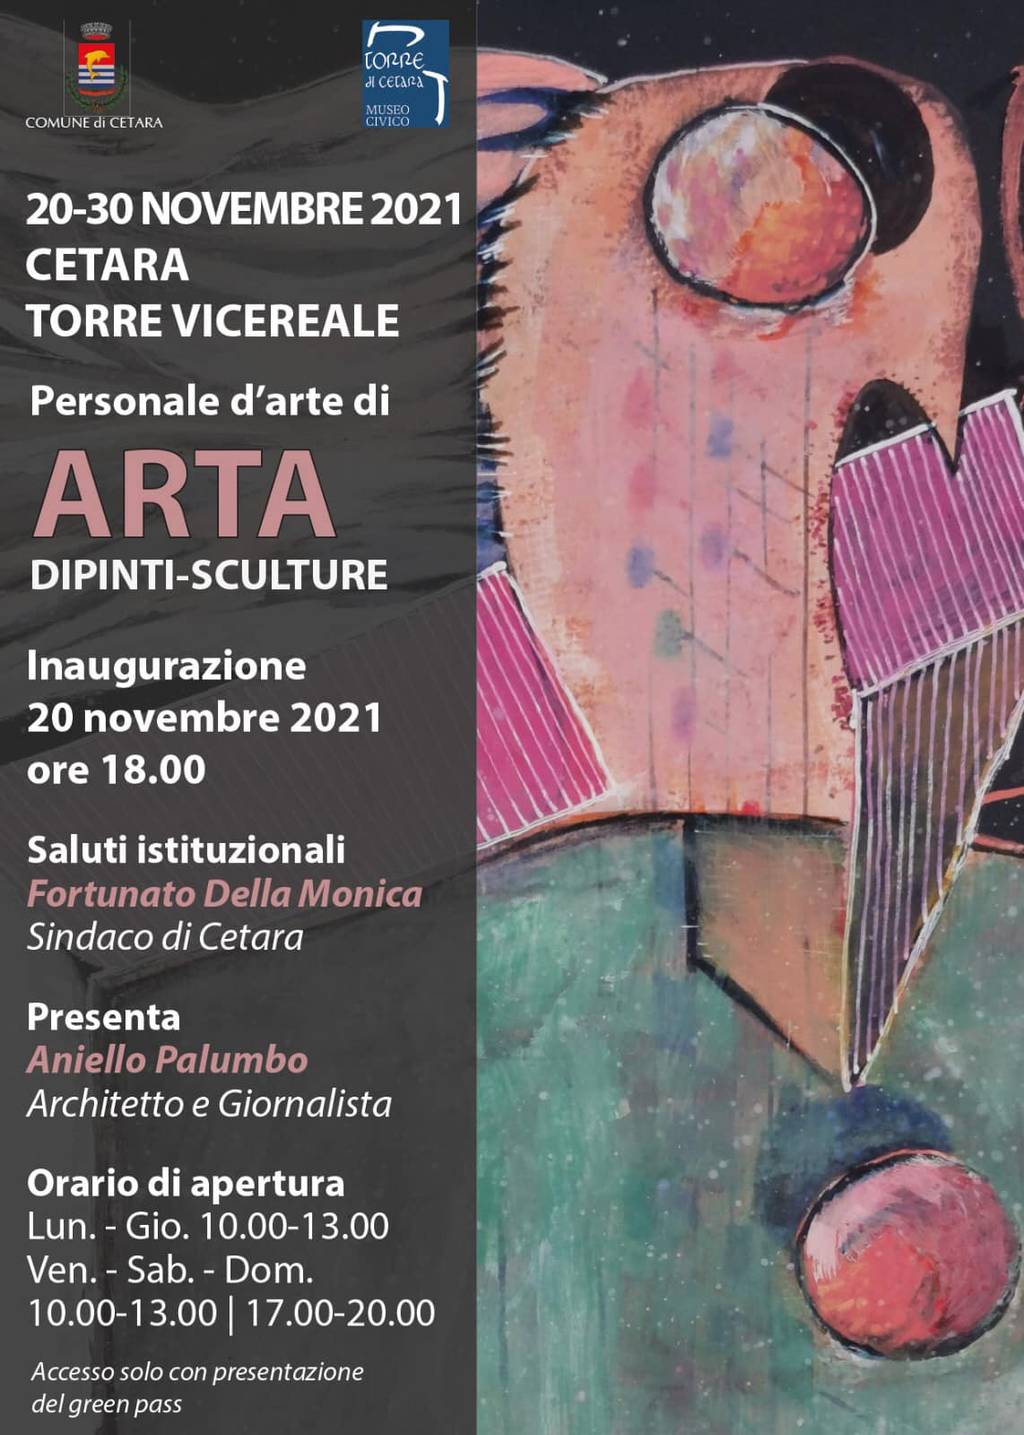 "Exhibition of contemporary art of paintings and sculptures" of the artist ARTA